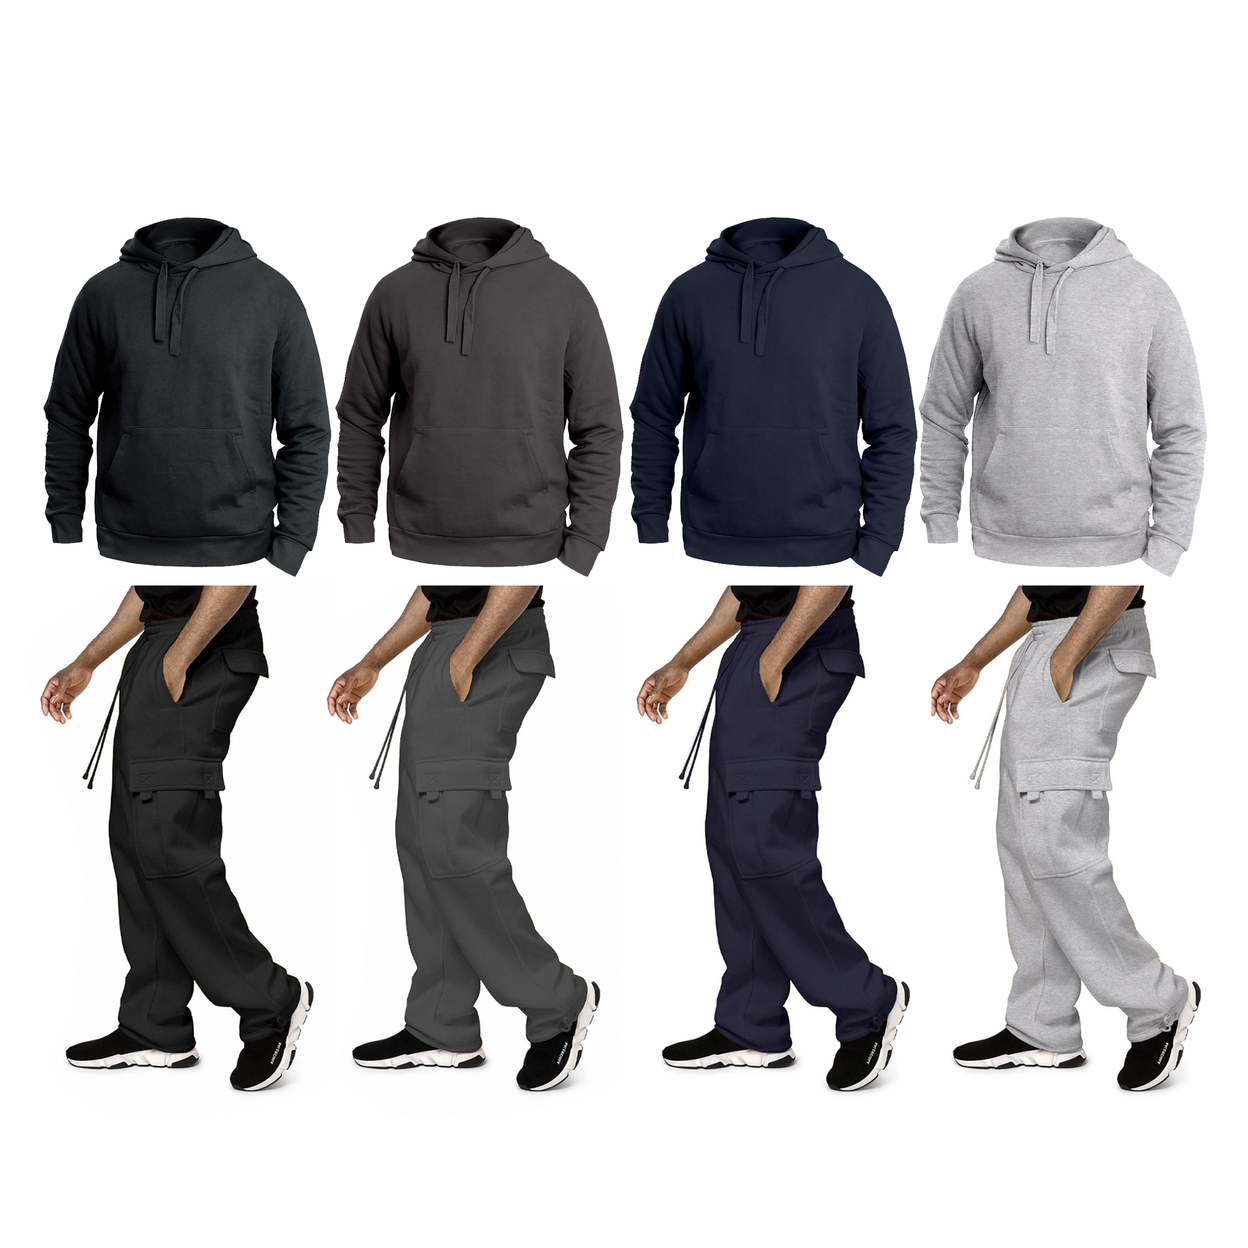 Multi-Pack: Big & Tall Men's Winter Warm Cozy Athletic Fleece Lined Multi-Pocket Cargo Sweatsuit - Charcoal, 1-pack, X-large